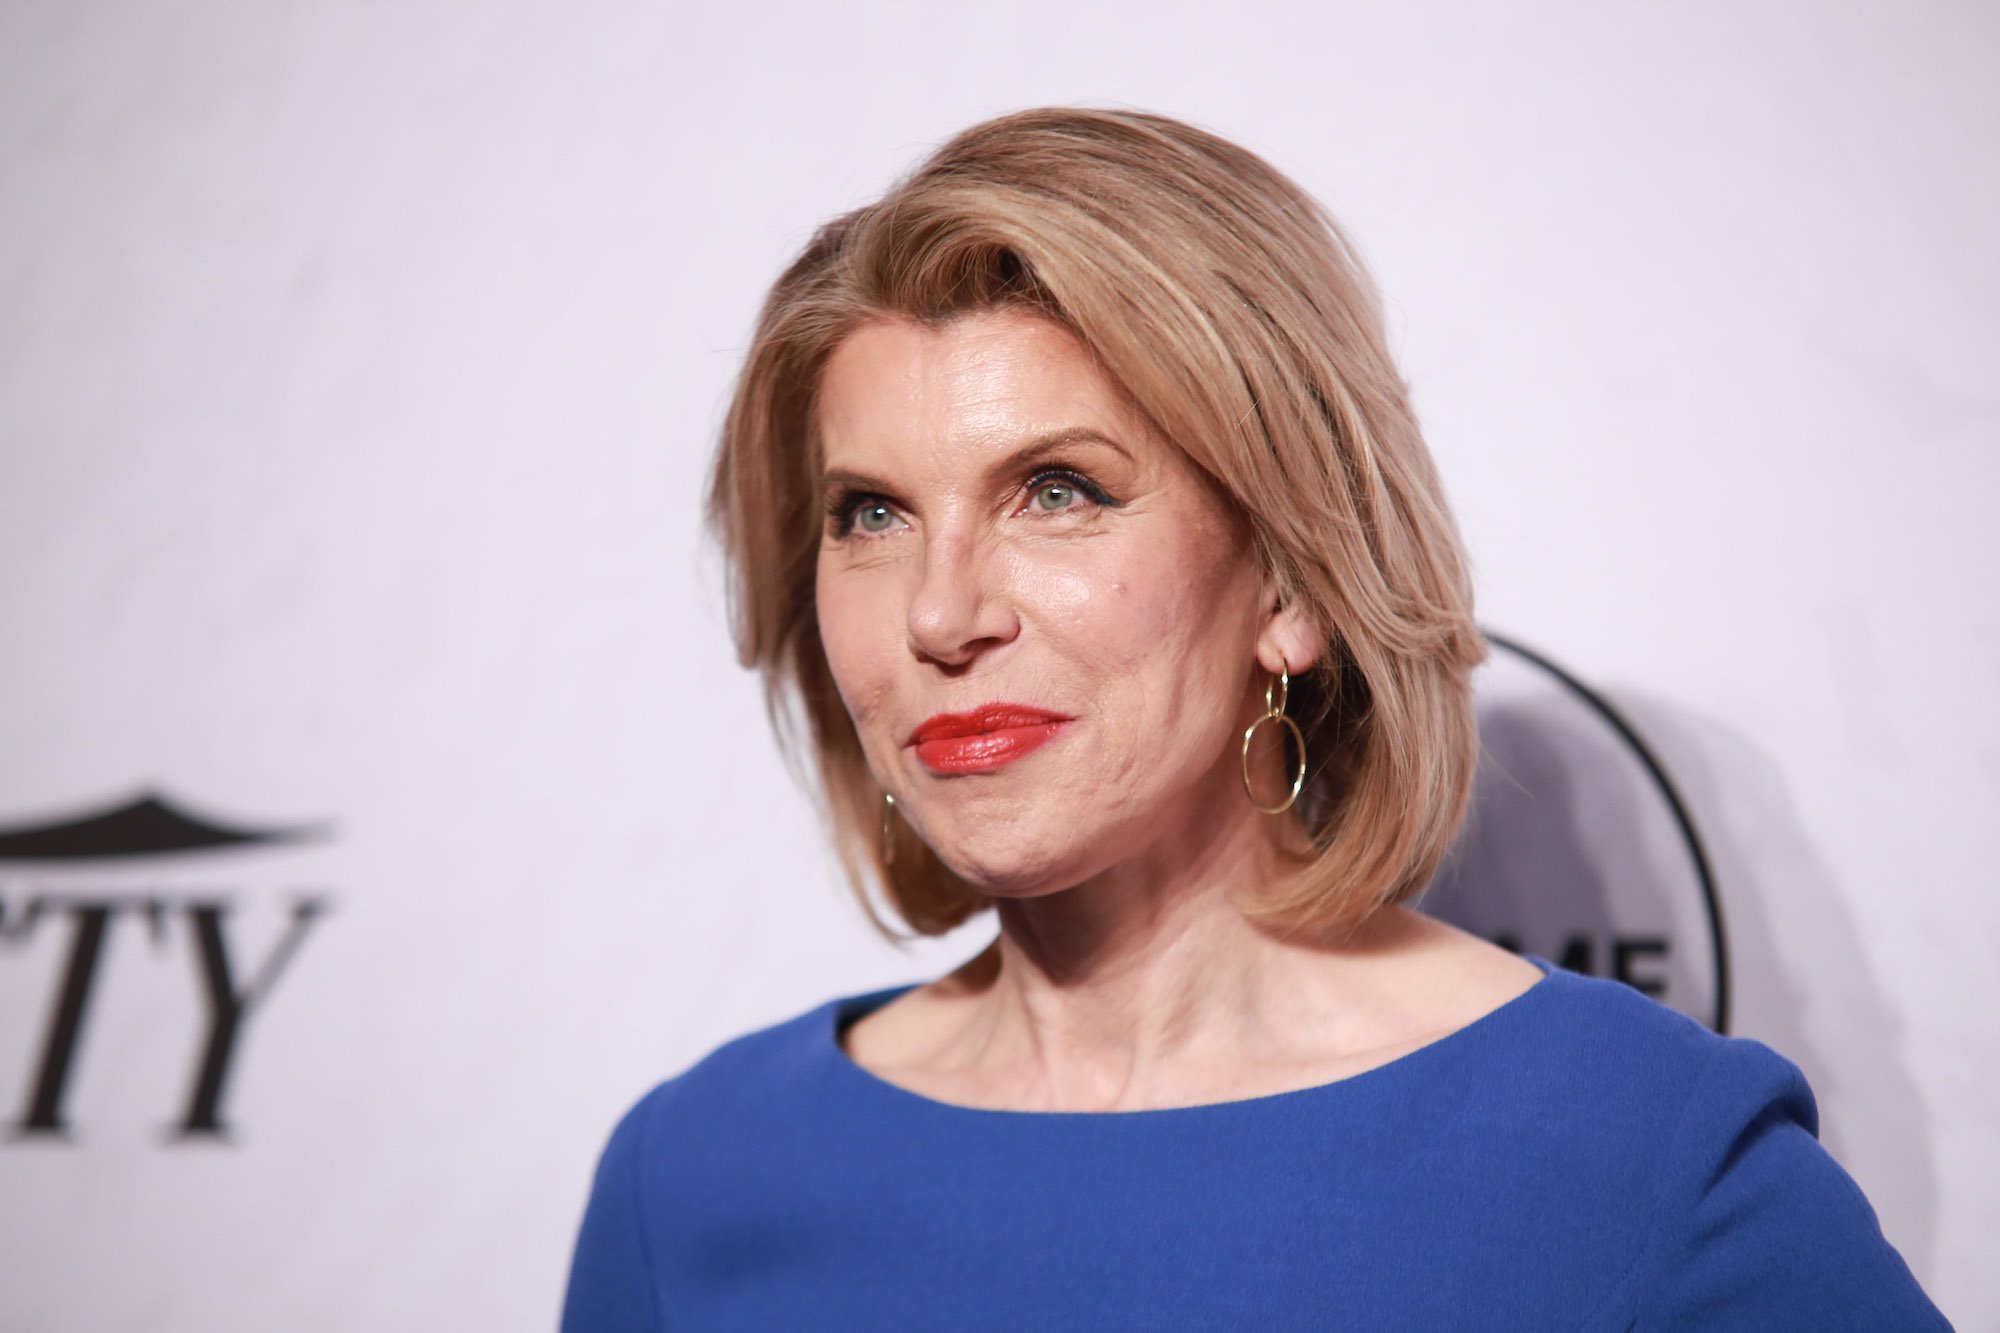 ‘The Good Wife’: Christine Baranski Is So ‘Wonderful’ In Real-Life That the Series Changed Diana Lockhart’s ‘B—- Boss’ Character